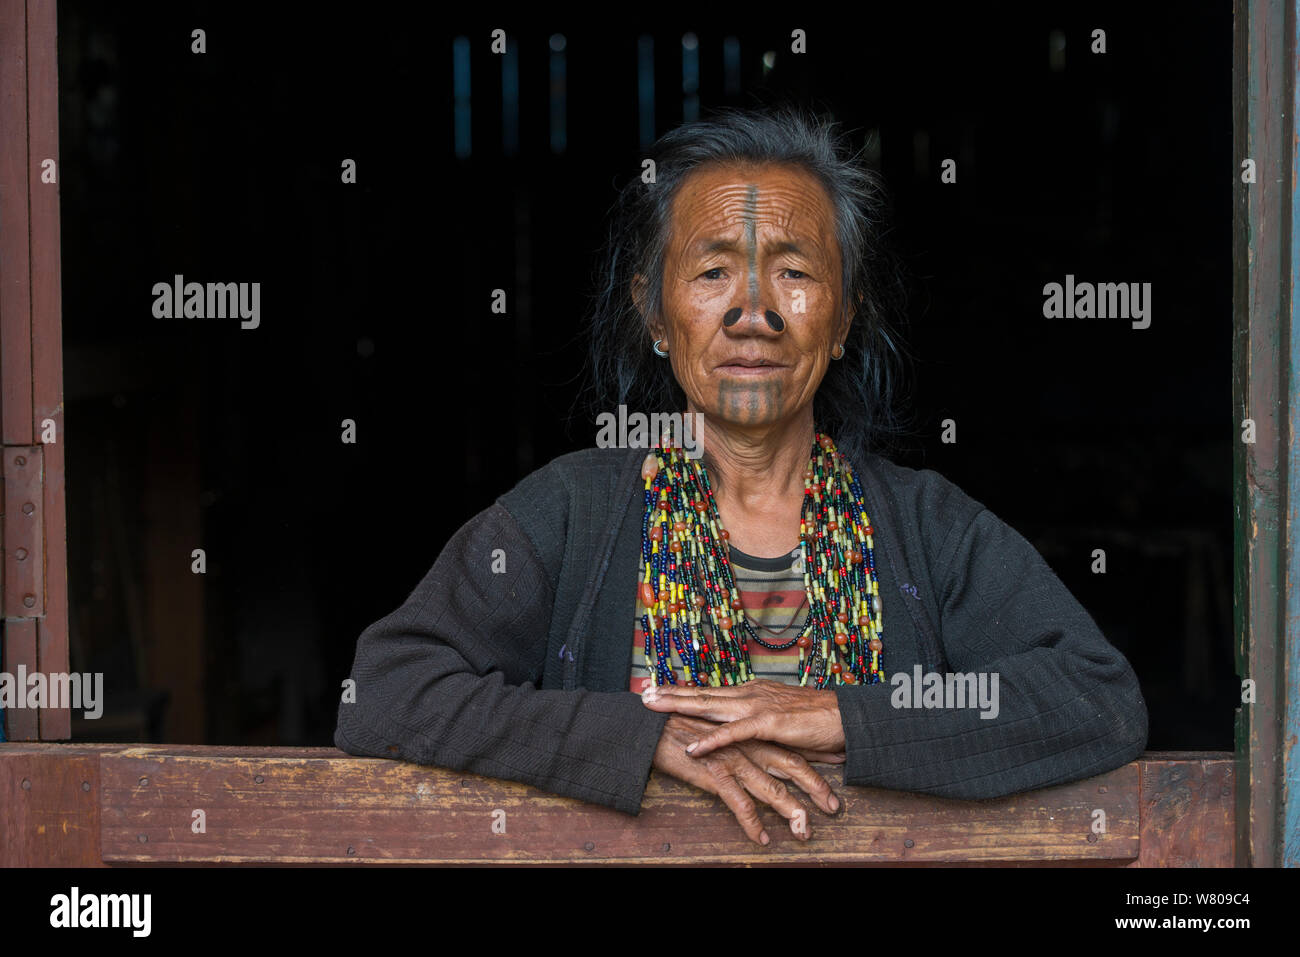 Apatani woman with facial tattoos and traditional cane nose plugs / Yapin Hulo made to make them look unattractive to males from other tribes. These facial modifications are  now  outlawed. Apatani Tribe, Ziro Valley, Himalayan Foothills, Arunachal Pradesh.North East India, November 2014. Stock Photo